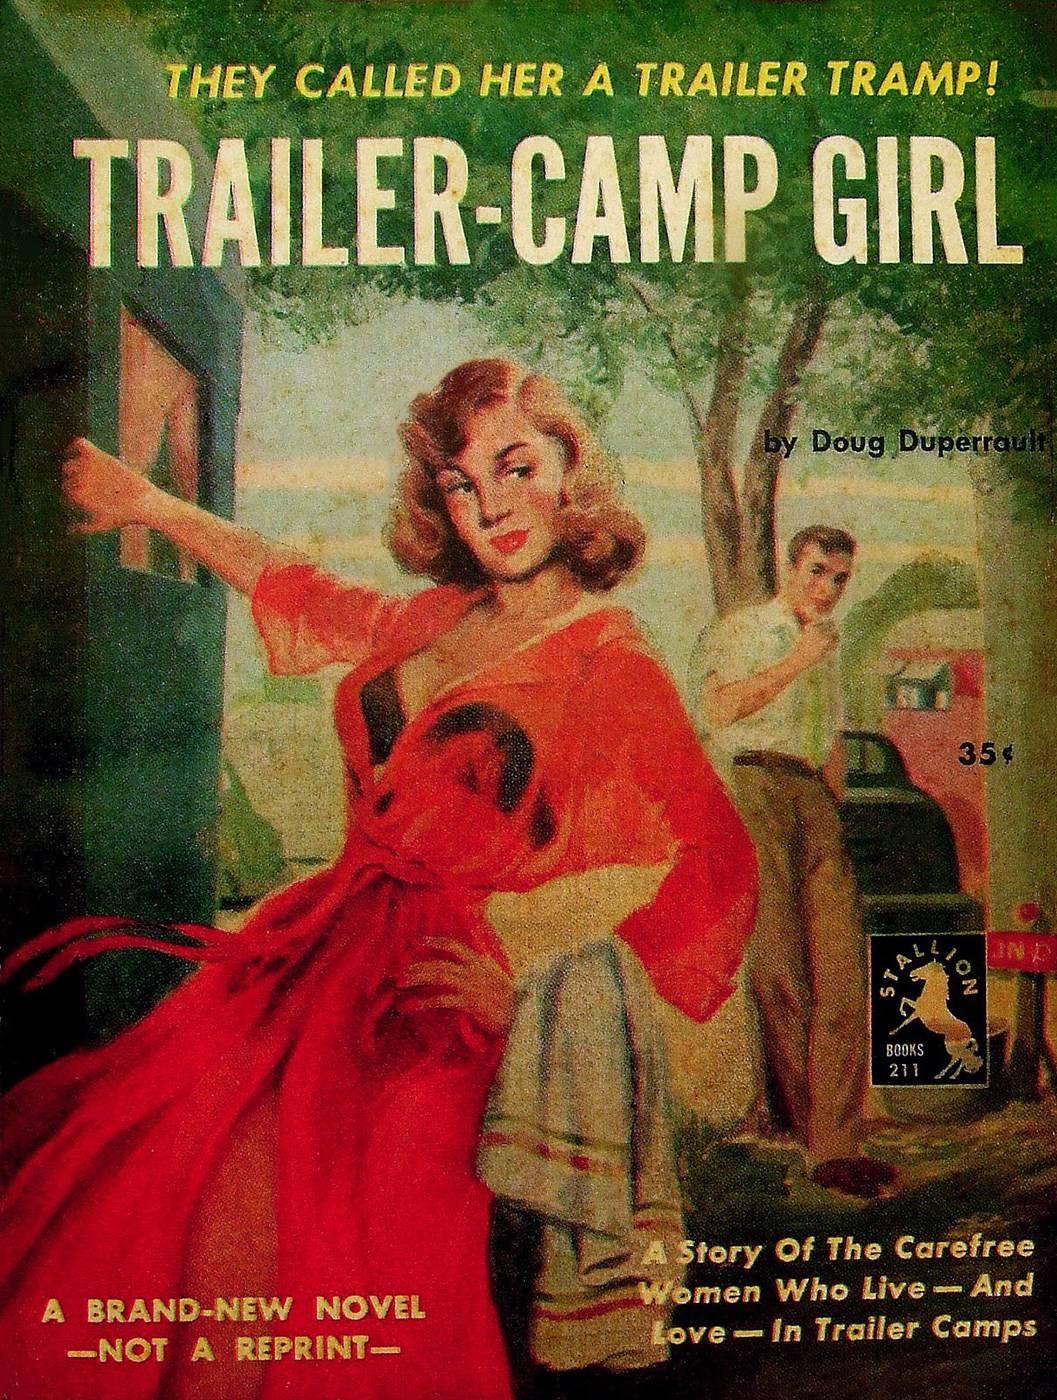 Trailer-Camp Girl - Painting by Isabel Dawson